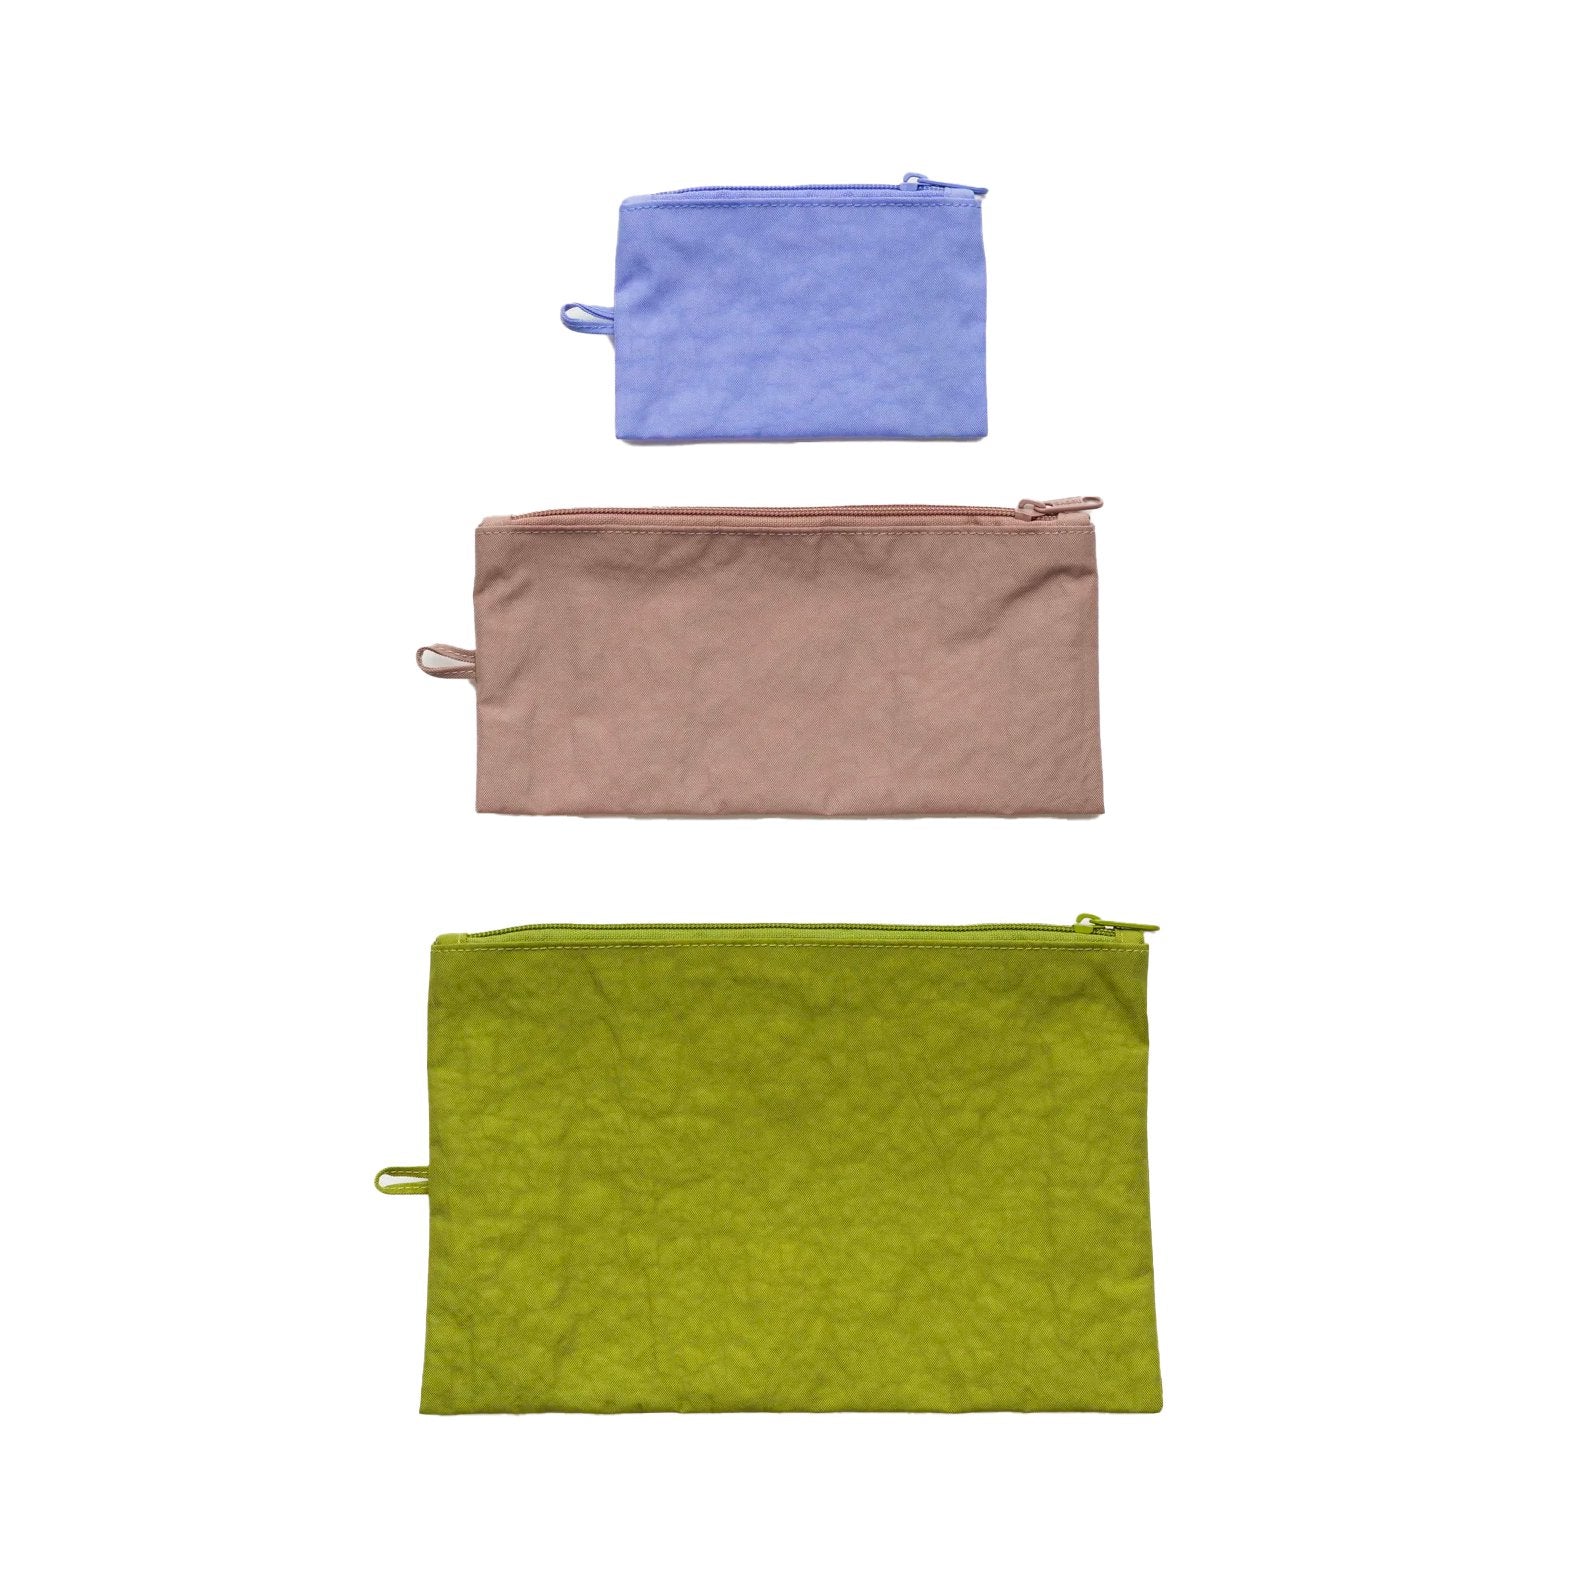 In-the-Loop To Go pouch